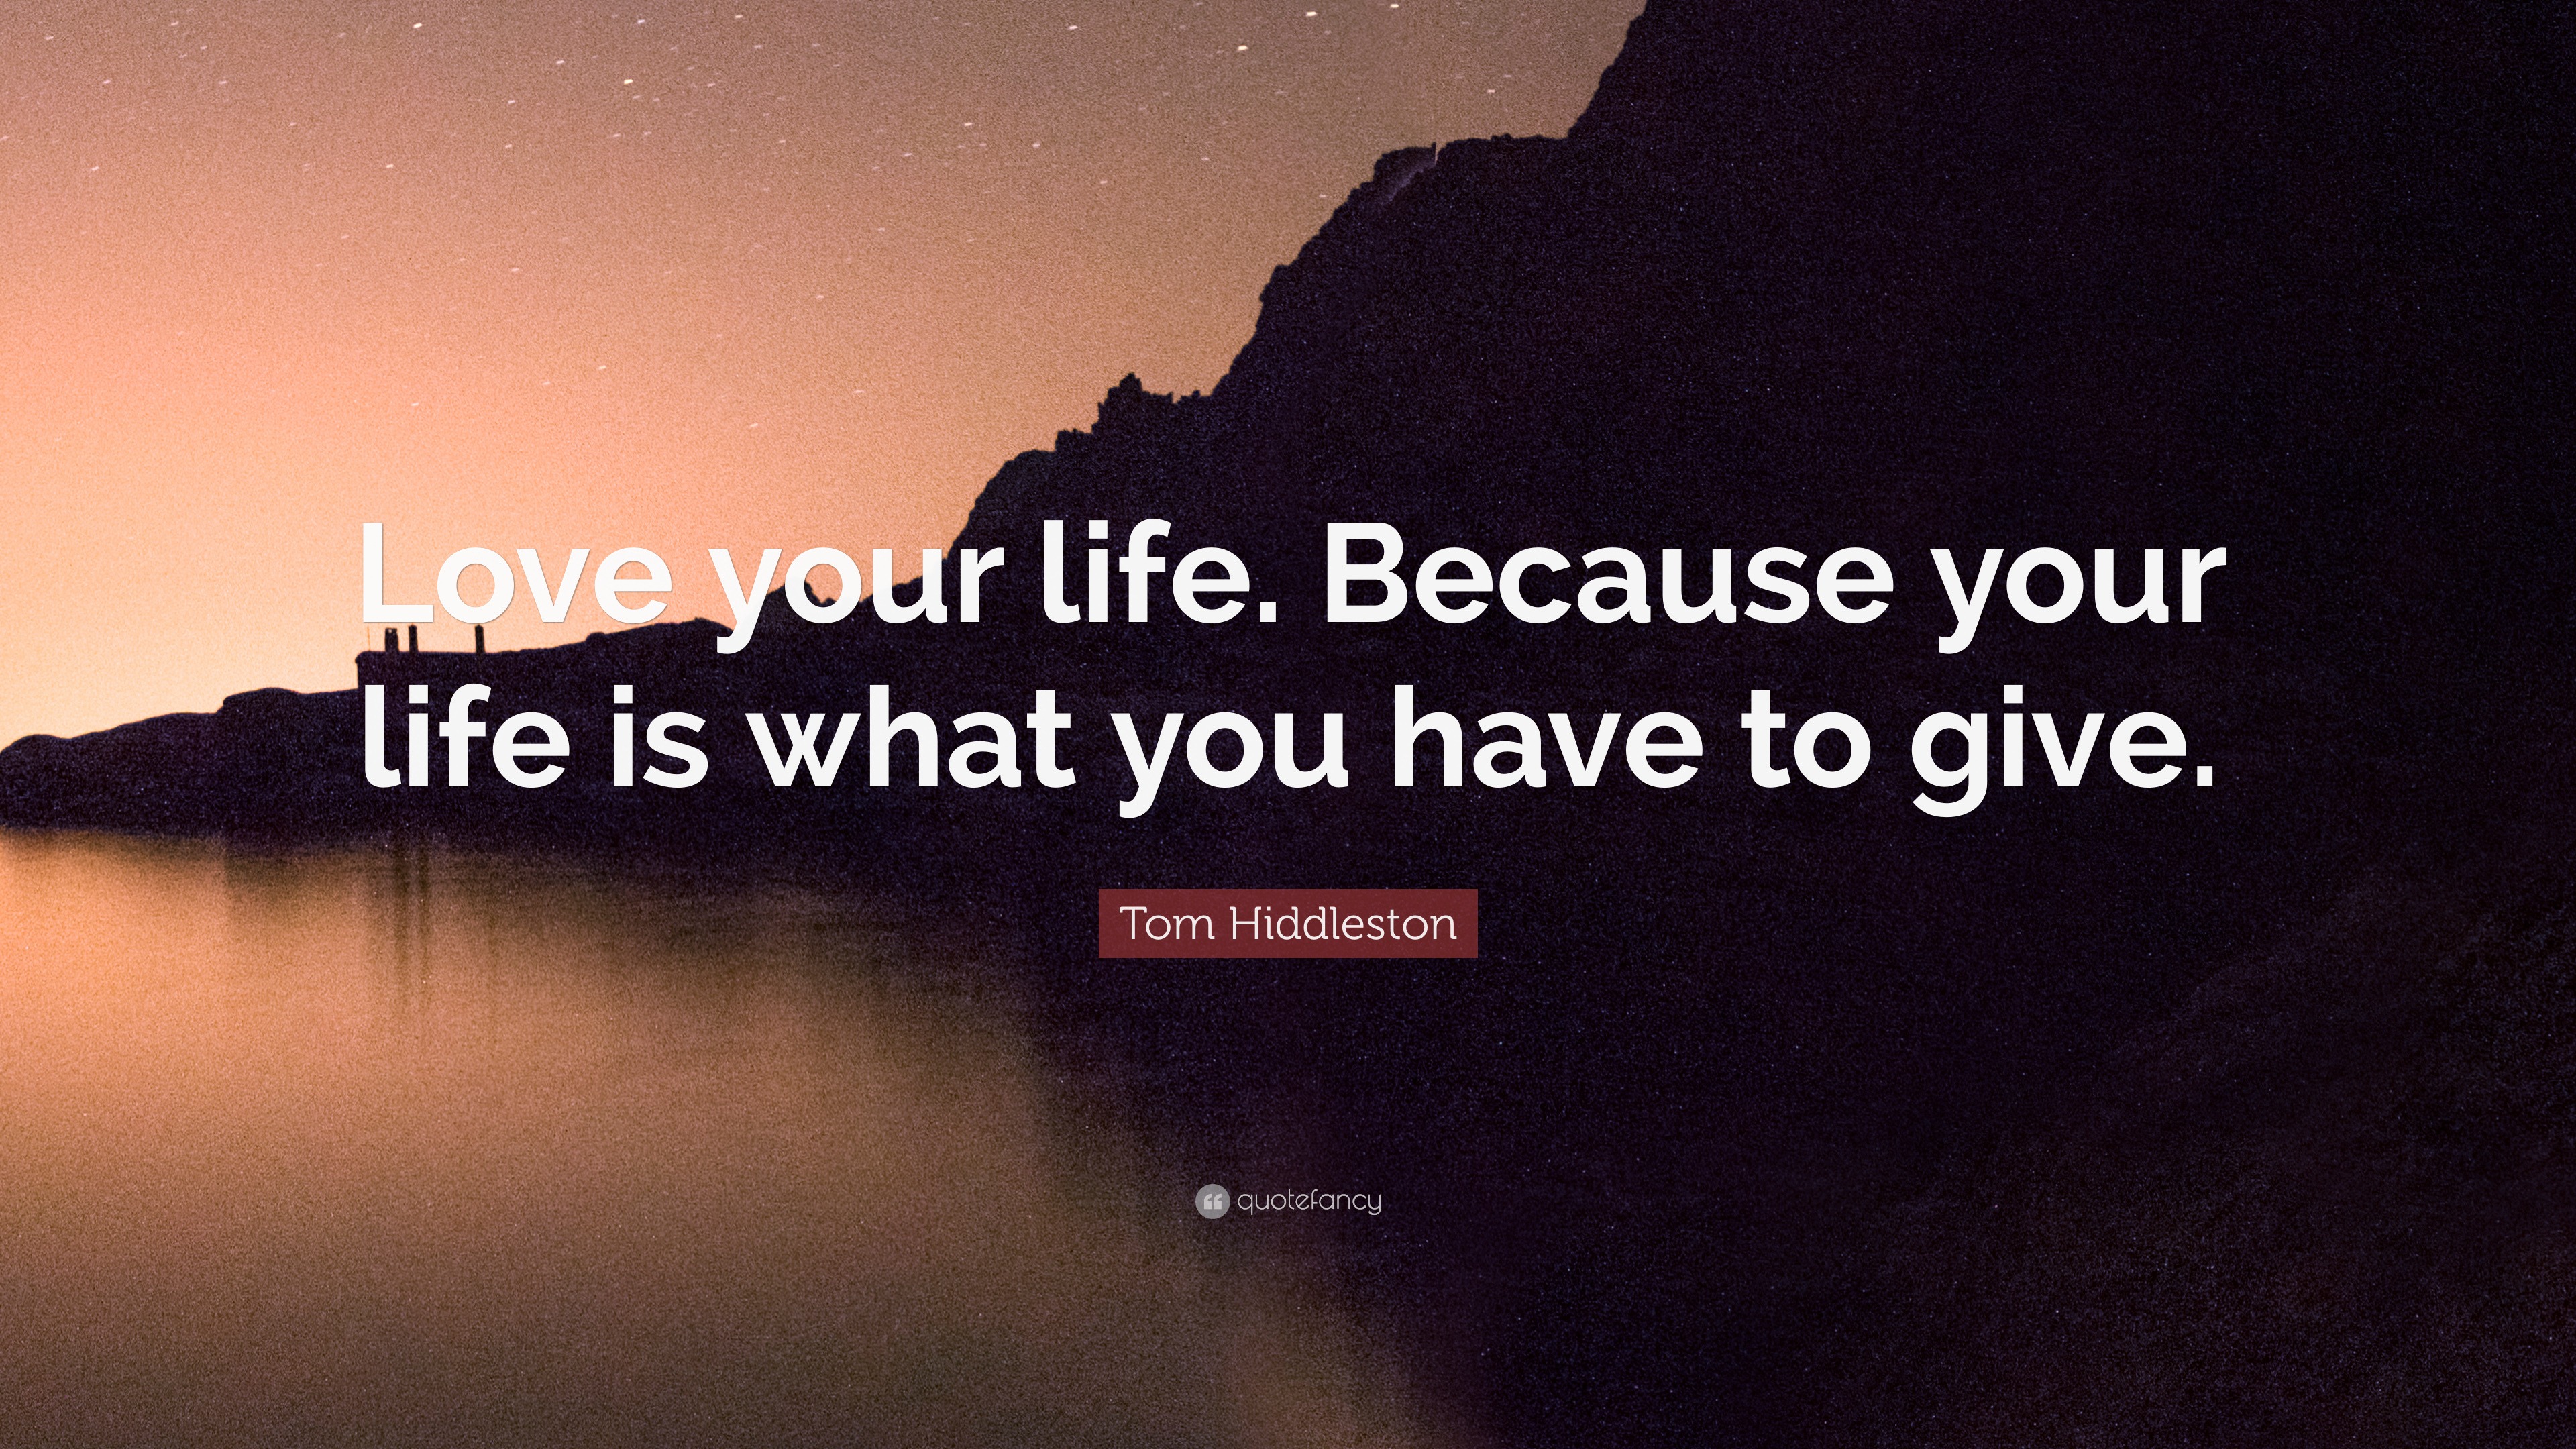 Tom Hiddleston Quote “Love your life Because your life is what you have